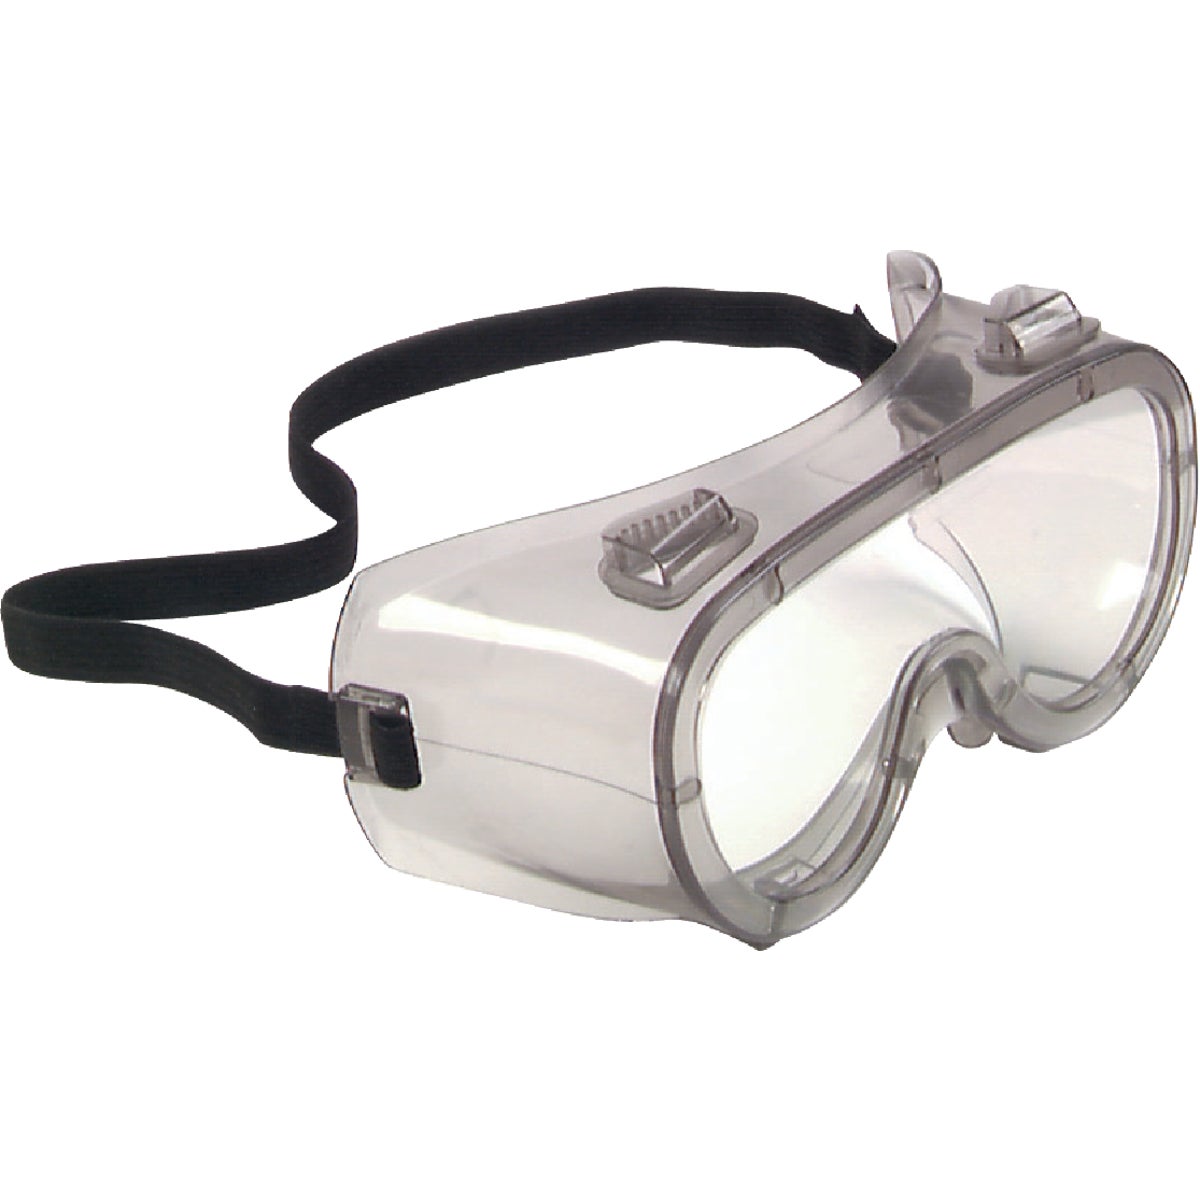 Item 356387, Safety goggles featuring indirect venting to move air through the goggles.